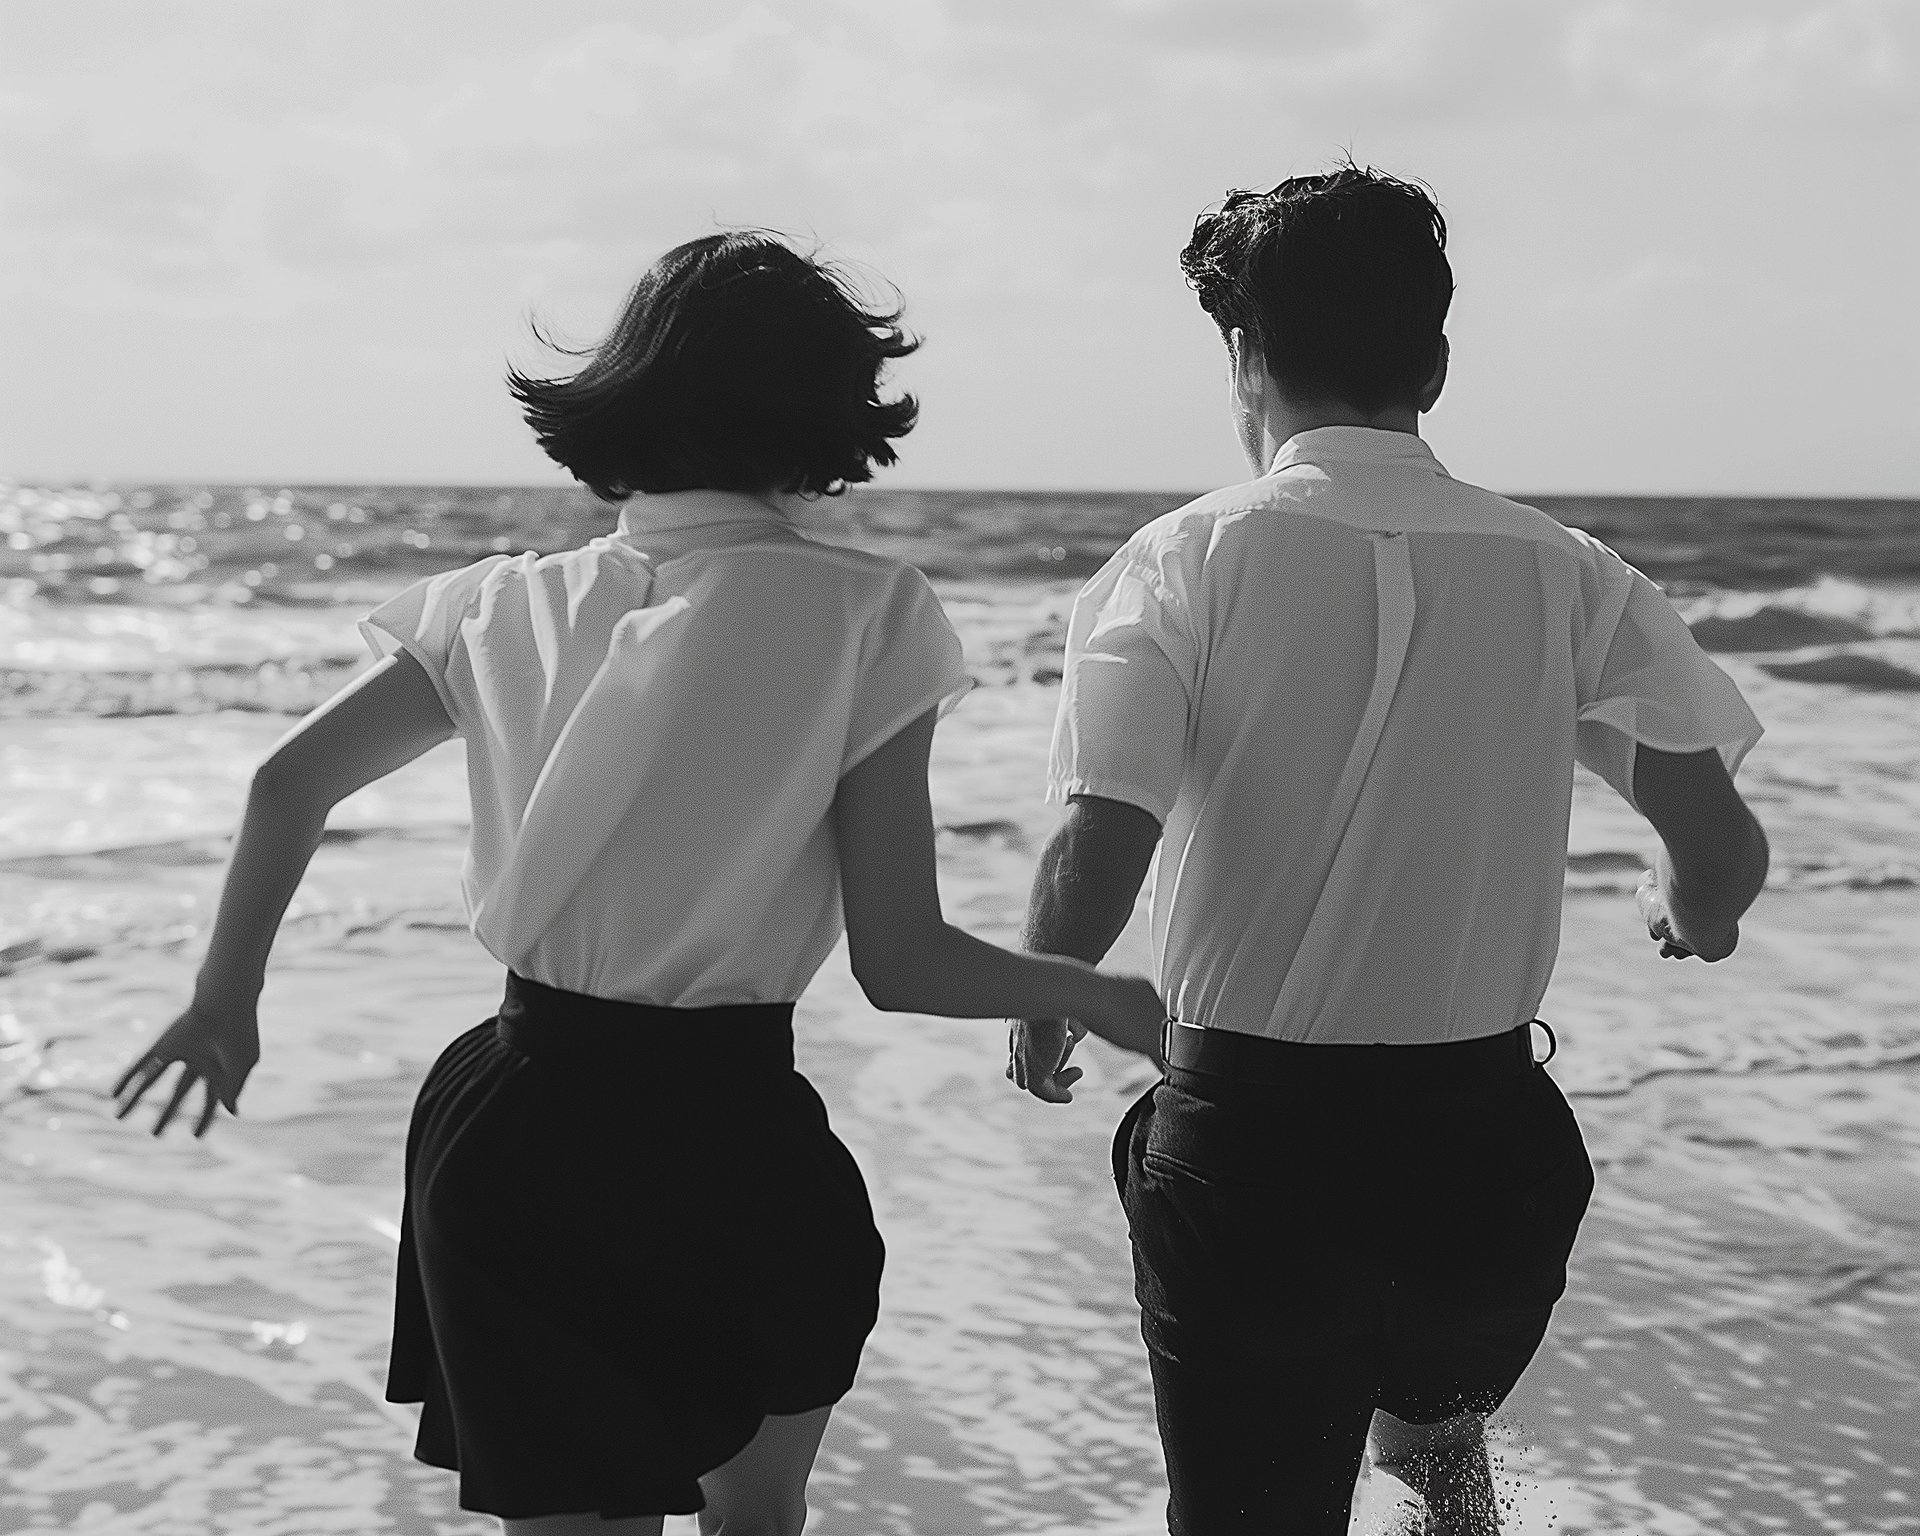 The Man and Woman by the Seashore